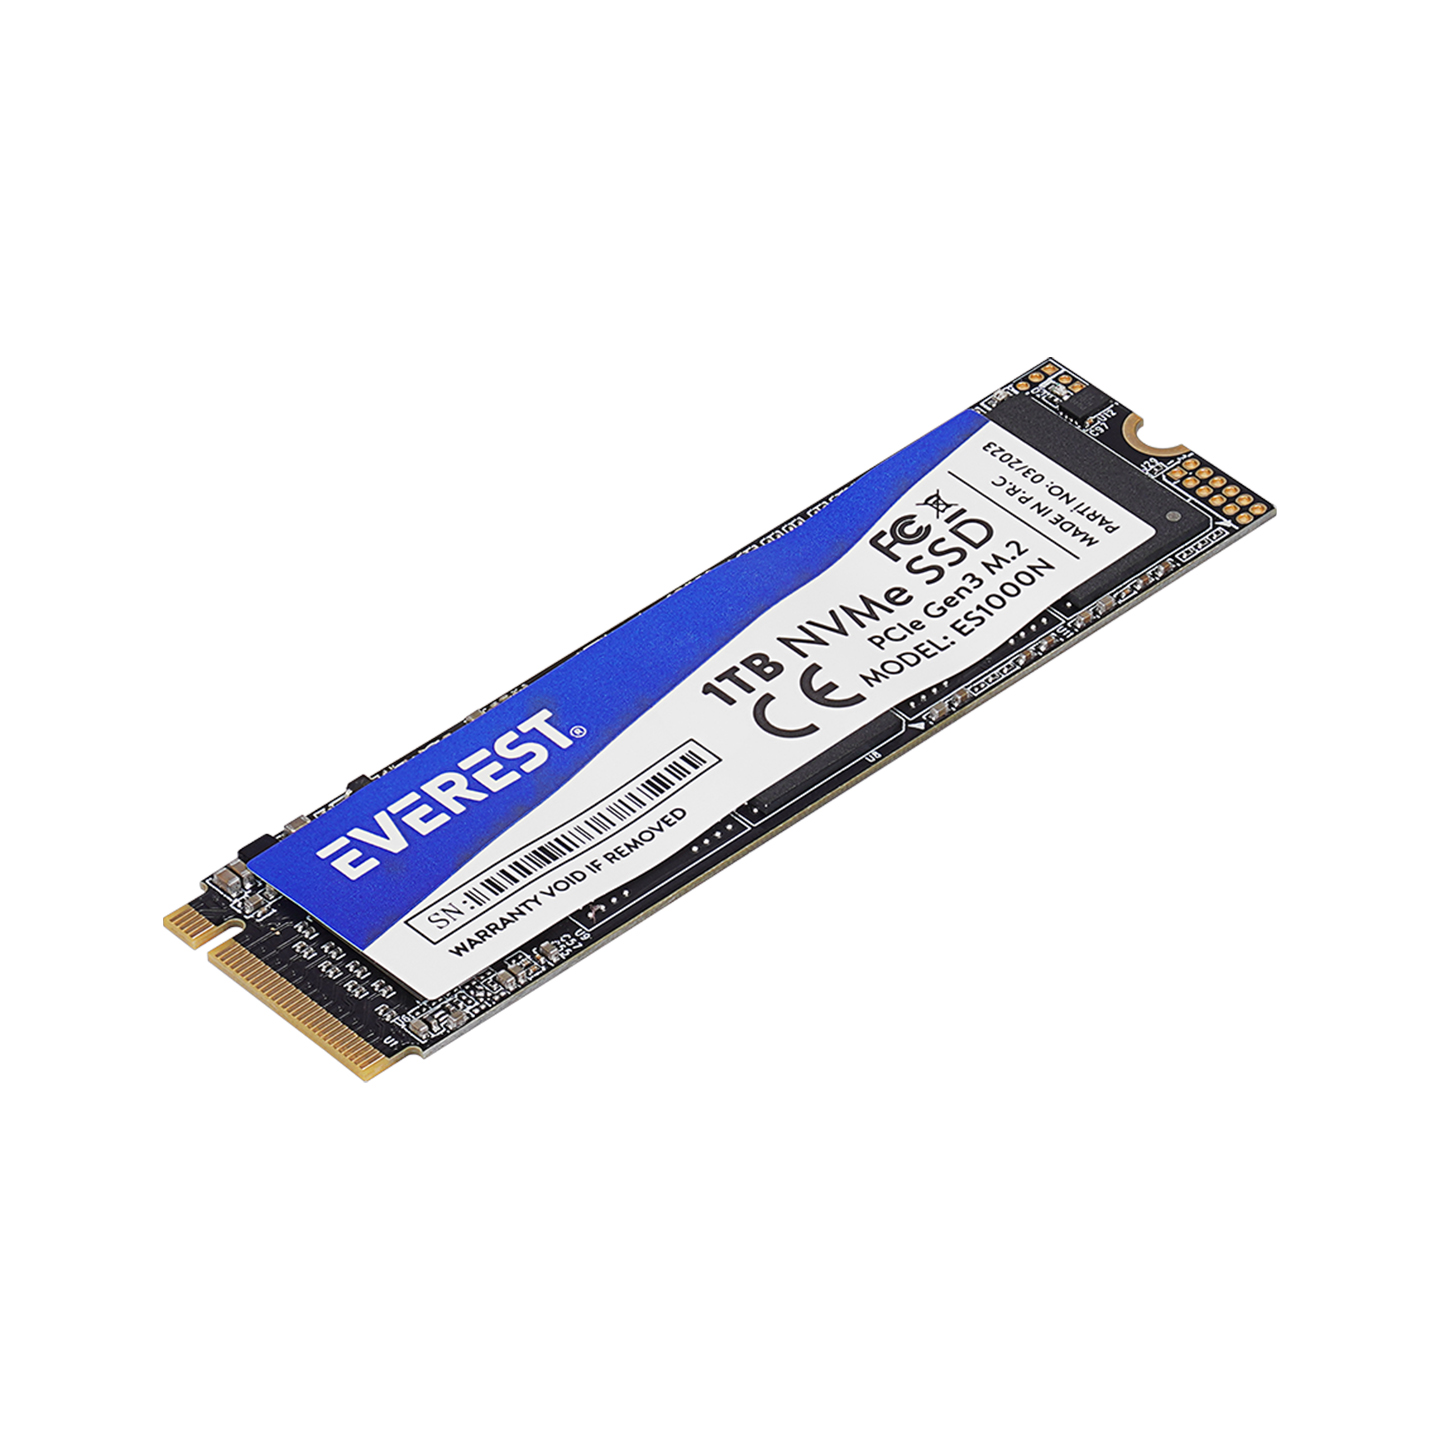 Everest ES1000N 1TB 3D NAND Flash 2500MB/1800MB PCIe Gen3 NVMe M.2 SSD (Solid State Drive)